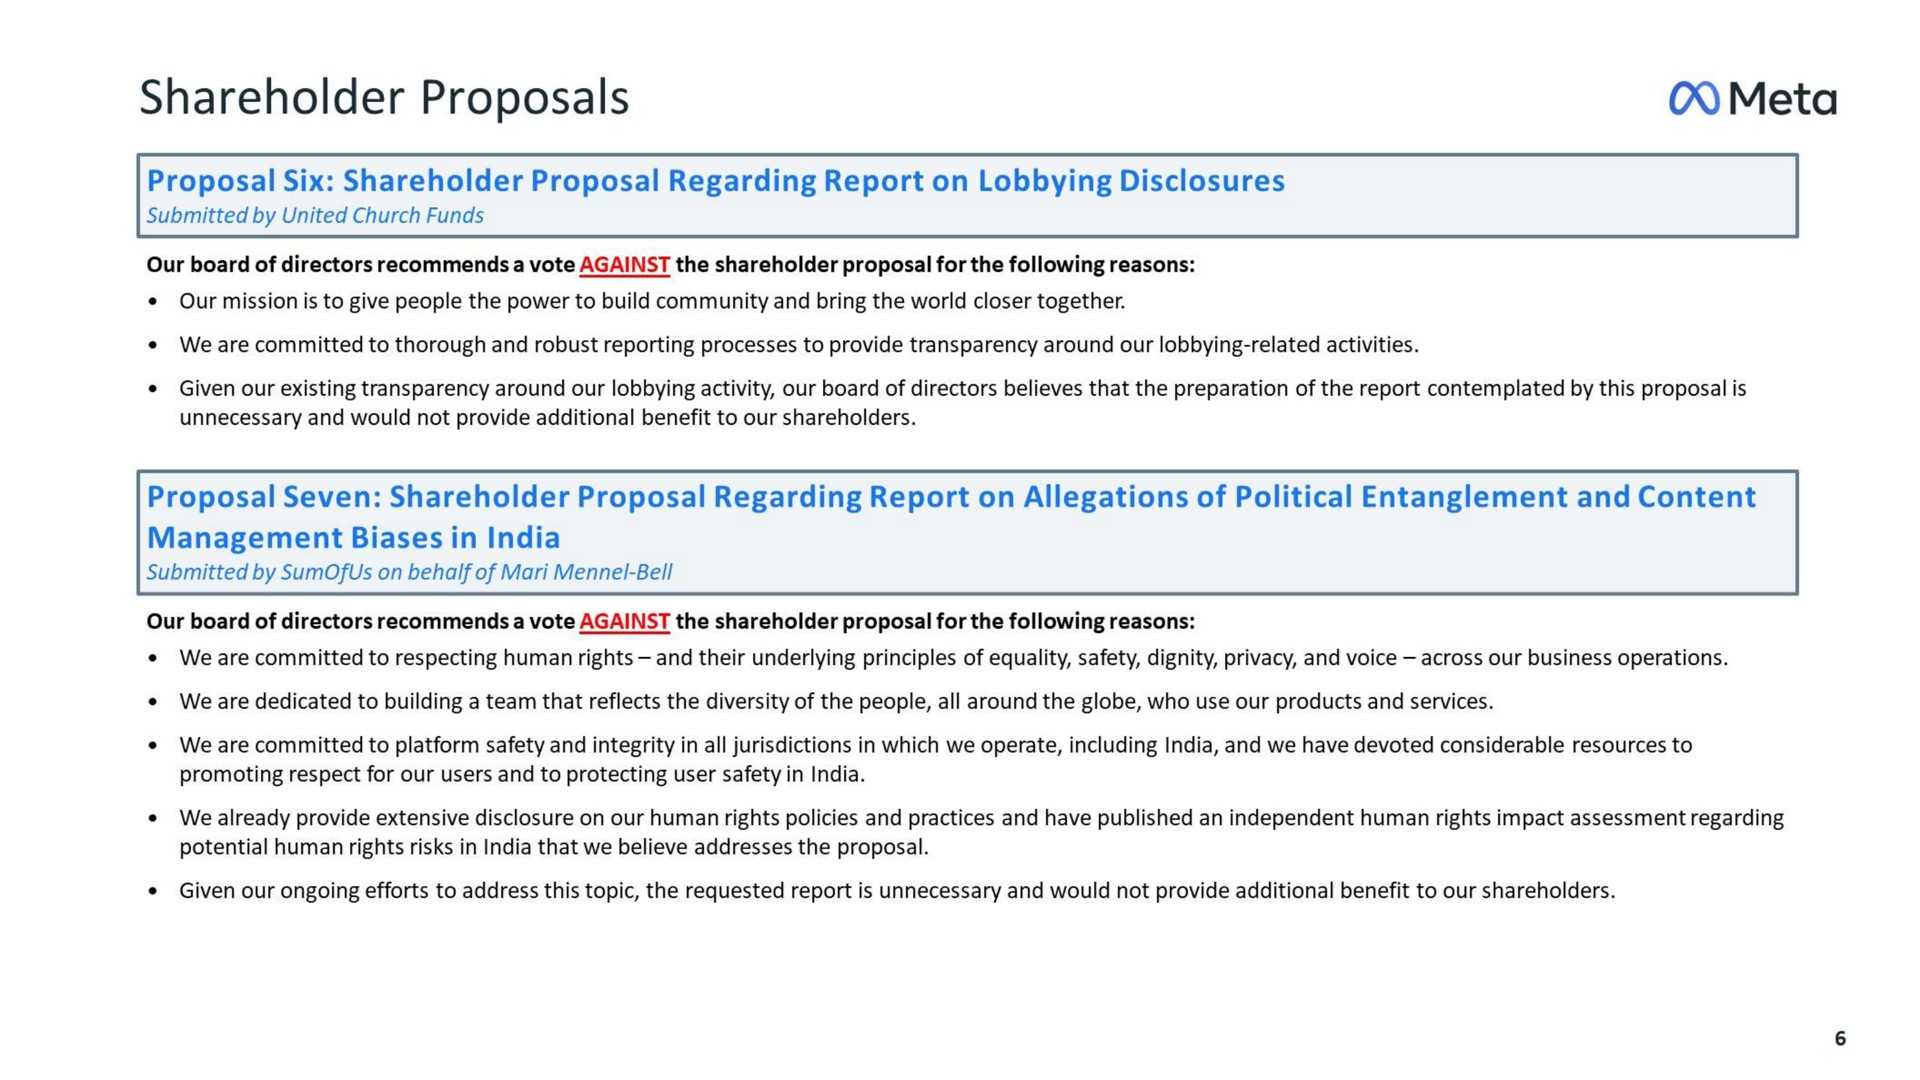 shareholder proposals meta proposal six shareholder proposal regarding report on lobbying disclosures proposal seven shareholder proposal regarding report on allegations of political entanglement and content management biases in | Meta